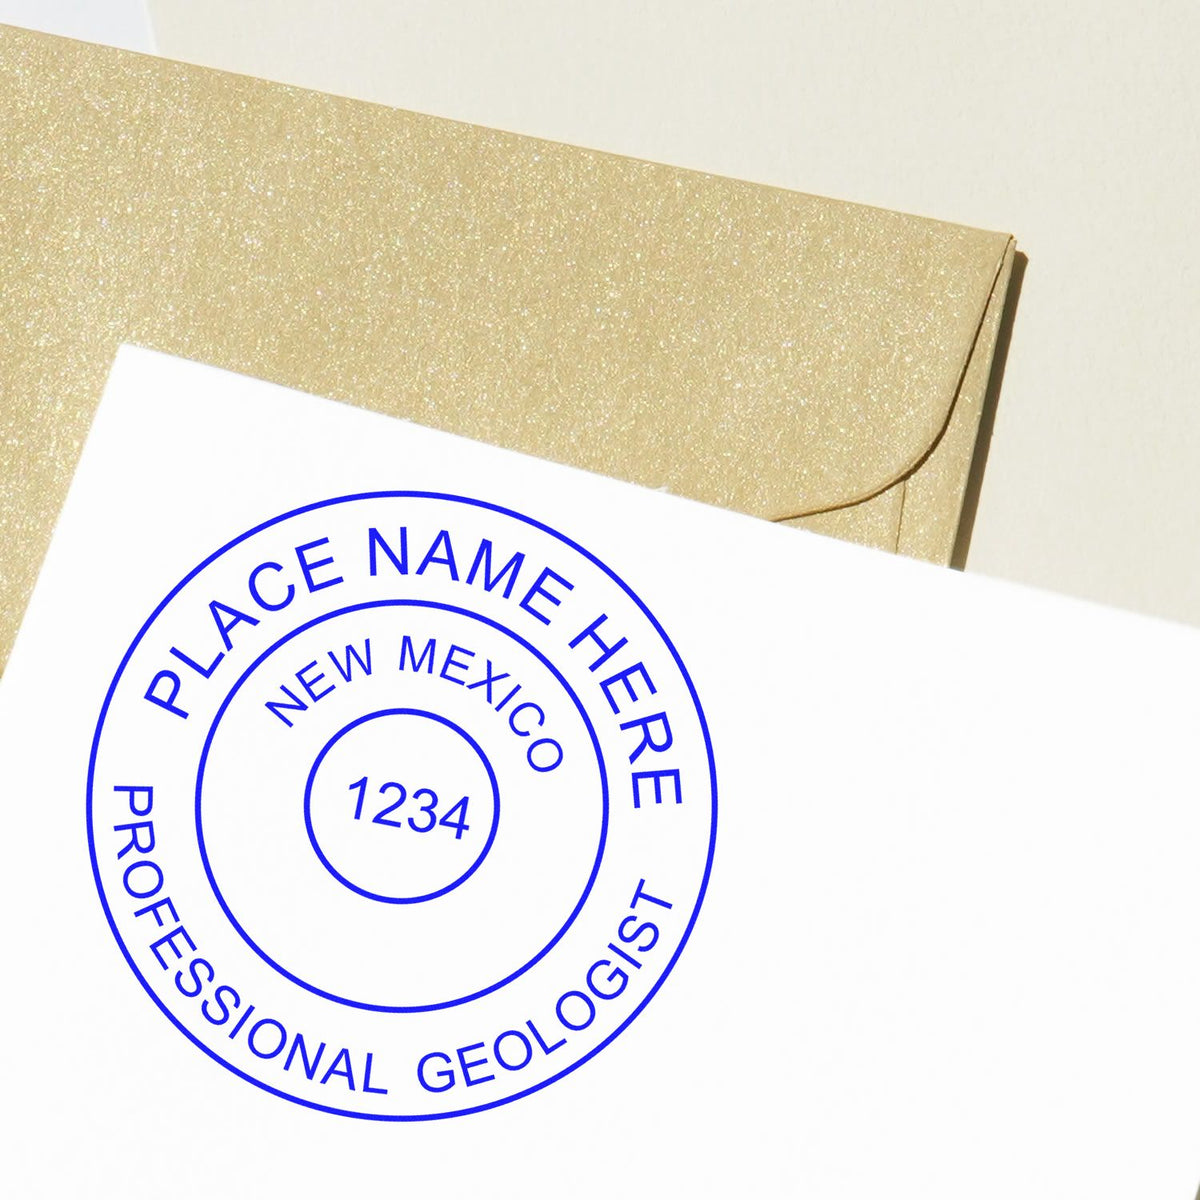 An alternative view of the Digital New Mexico Geologist Stamp, Electronic Seal for New Mexico Geologist stamped on a sheet of paper showing the image in use